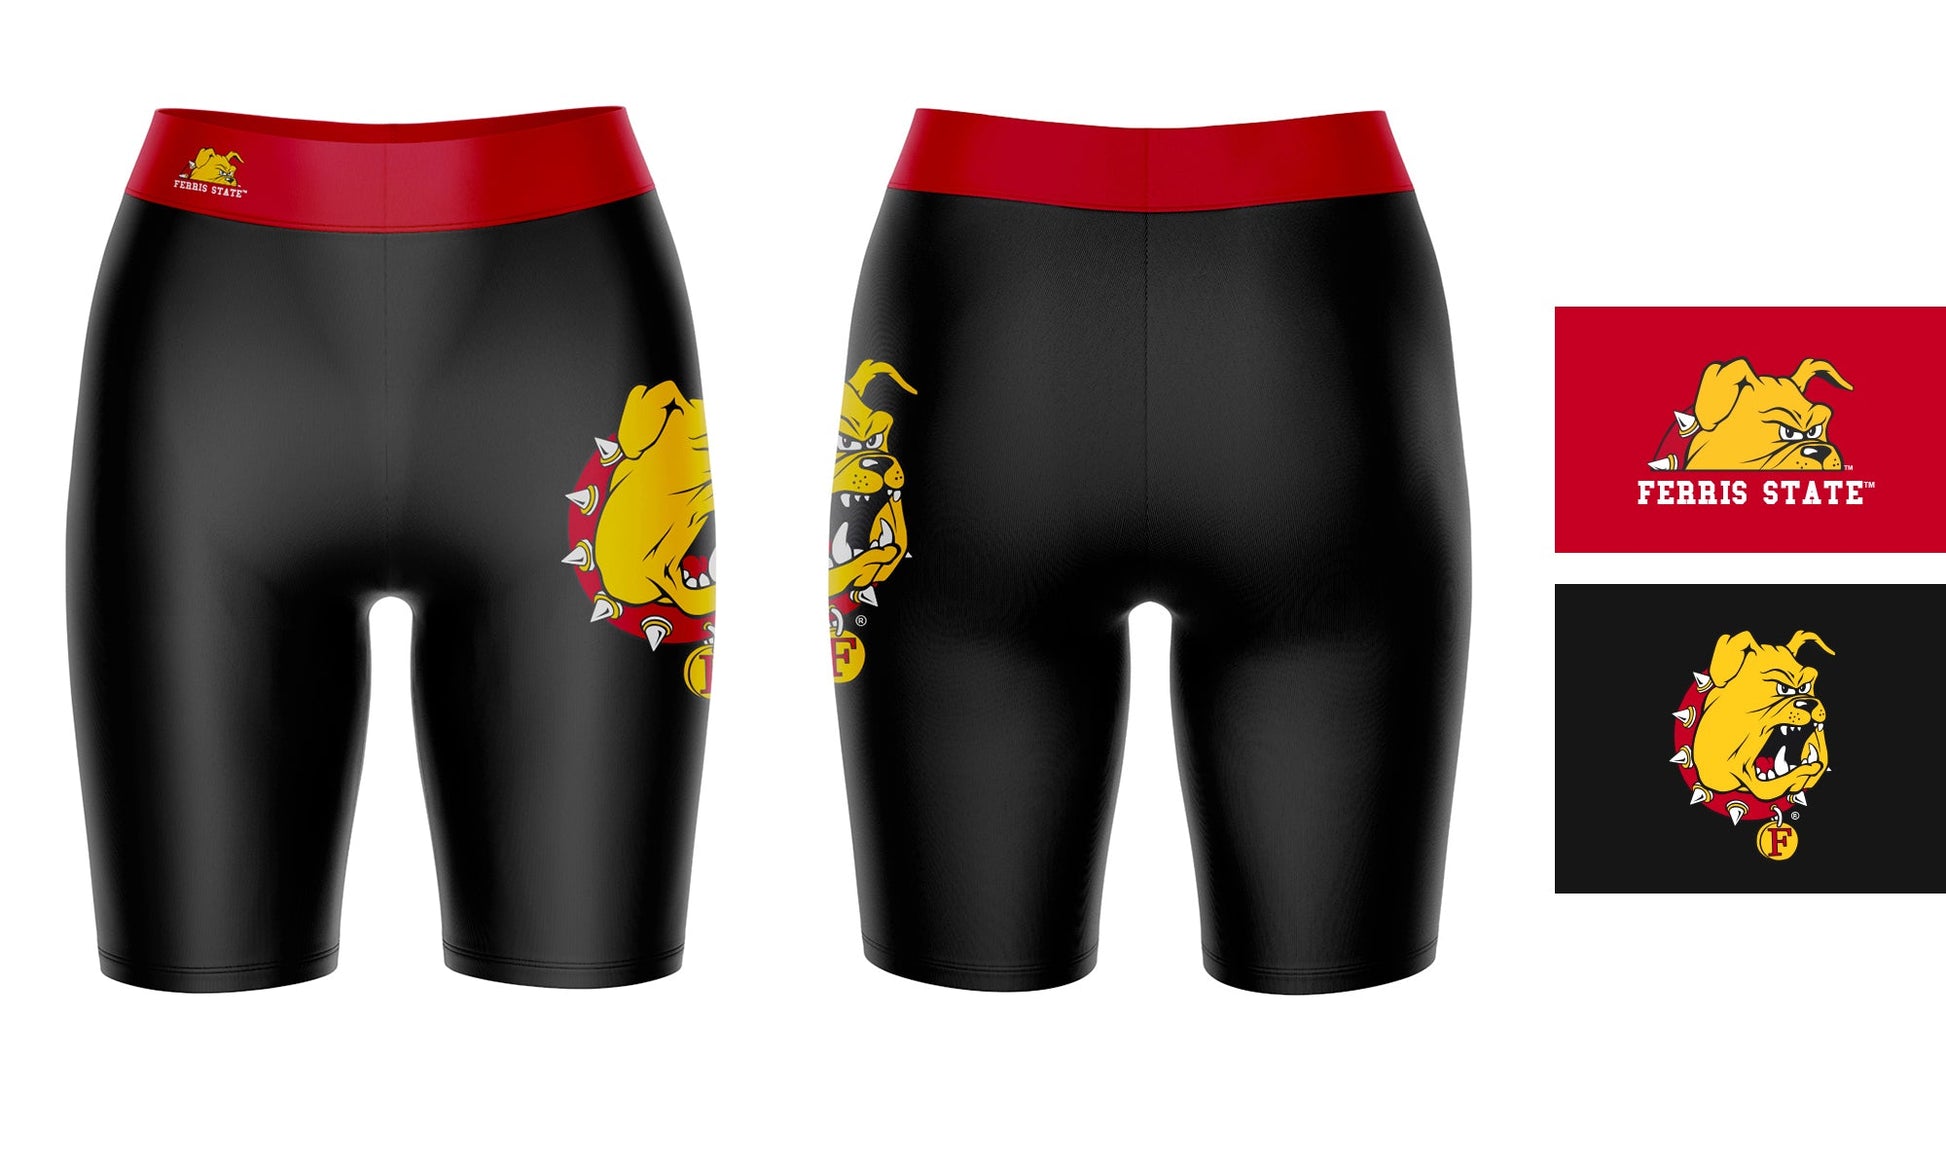 Ferris State Bulldogs Vive La Fete Game Day Logo on Thigh and Waistband Black and Red Women Bike Short 9 Inseam